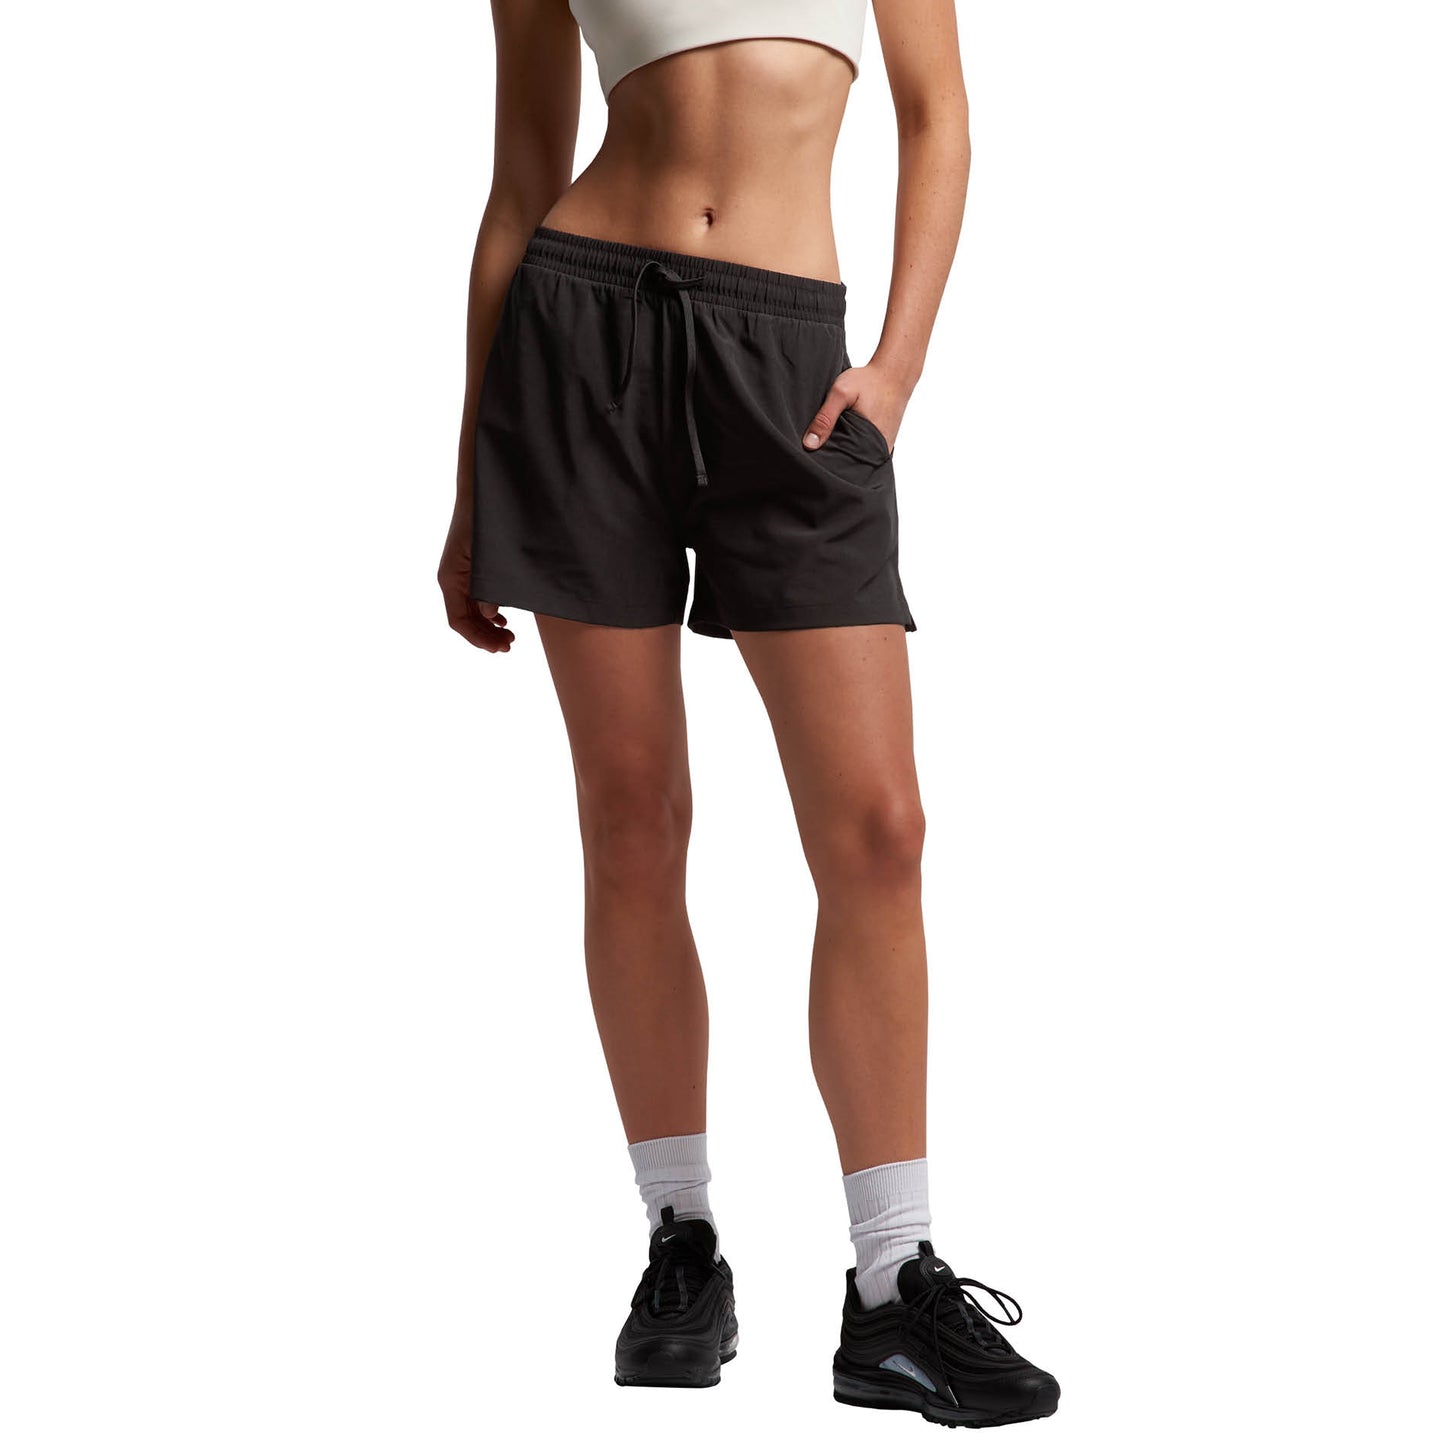 "Edible" Embroidered Women's Active Work Out Shorts